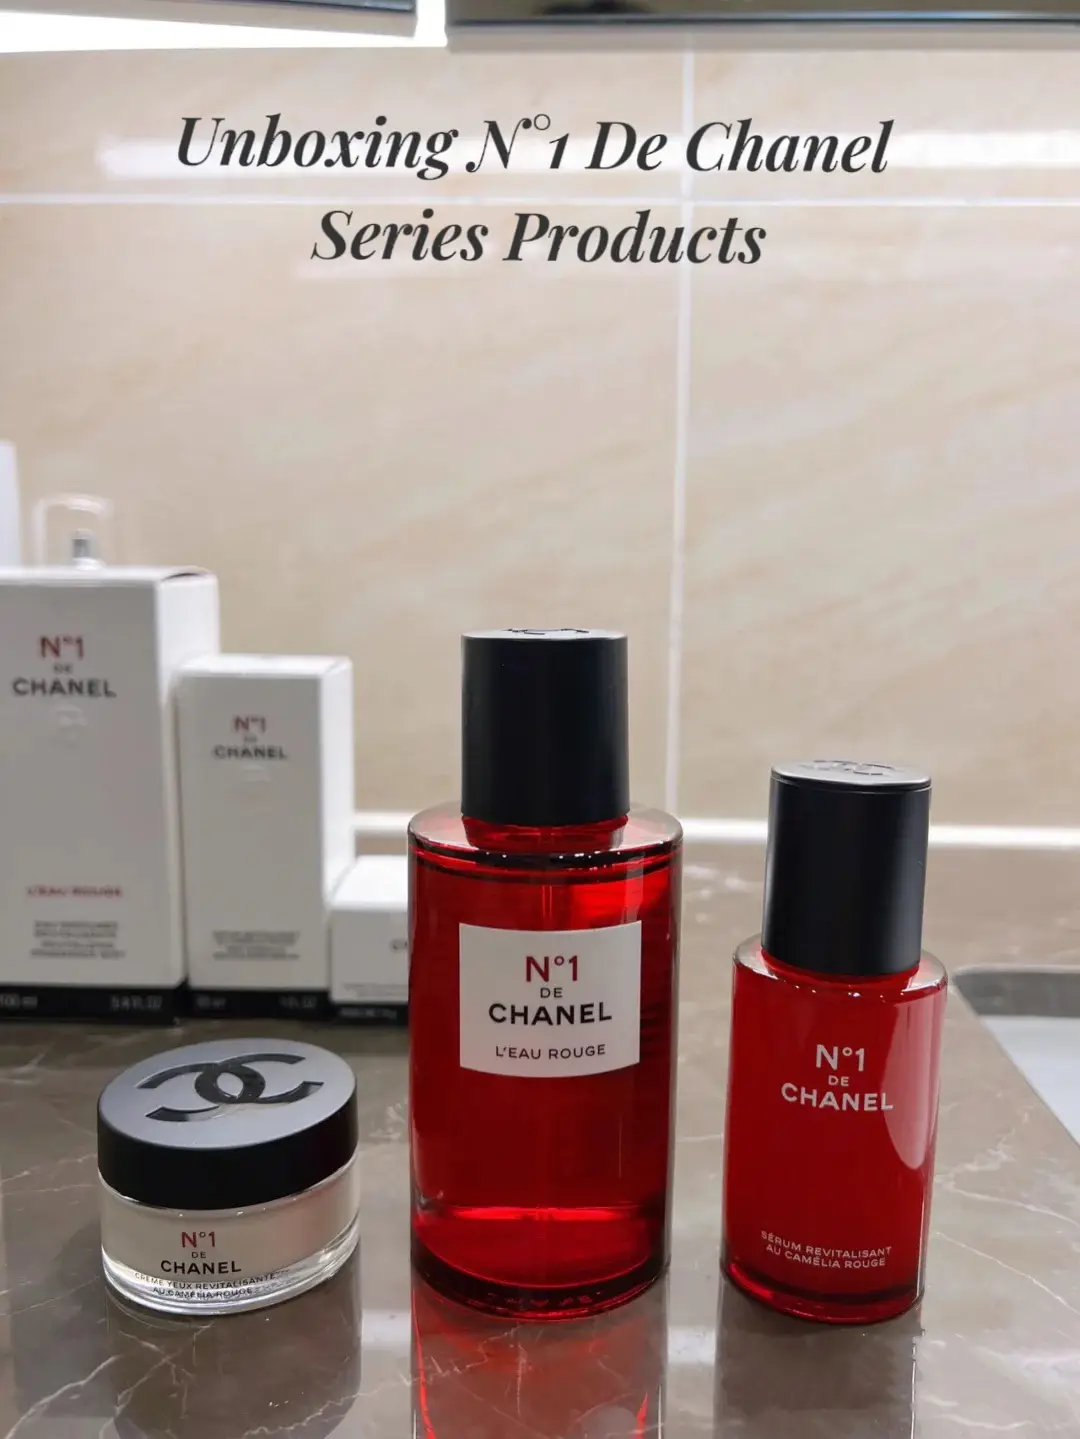 Unboxing N°1 De Chanel Series Products, Gallery posted by Ashy Patterson